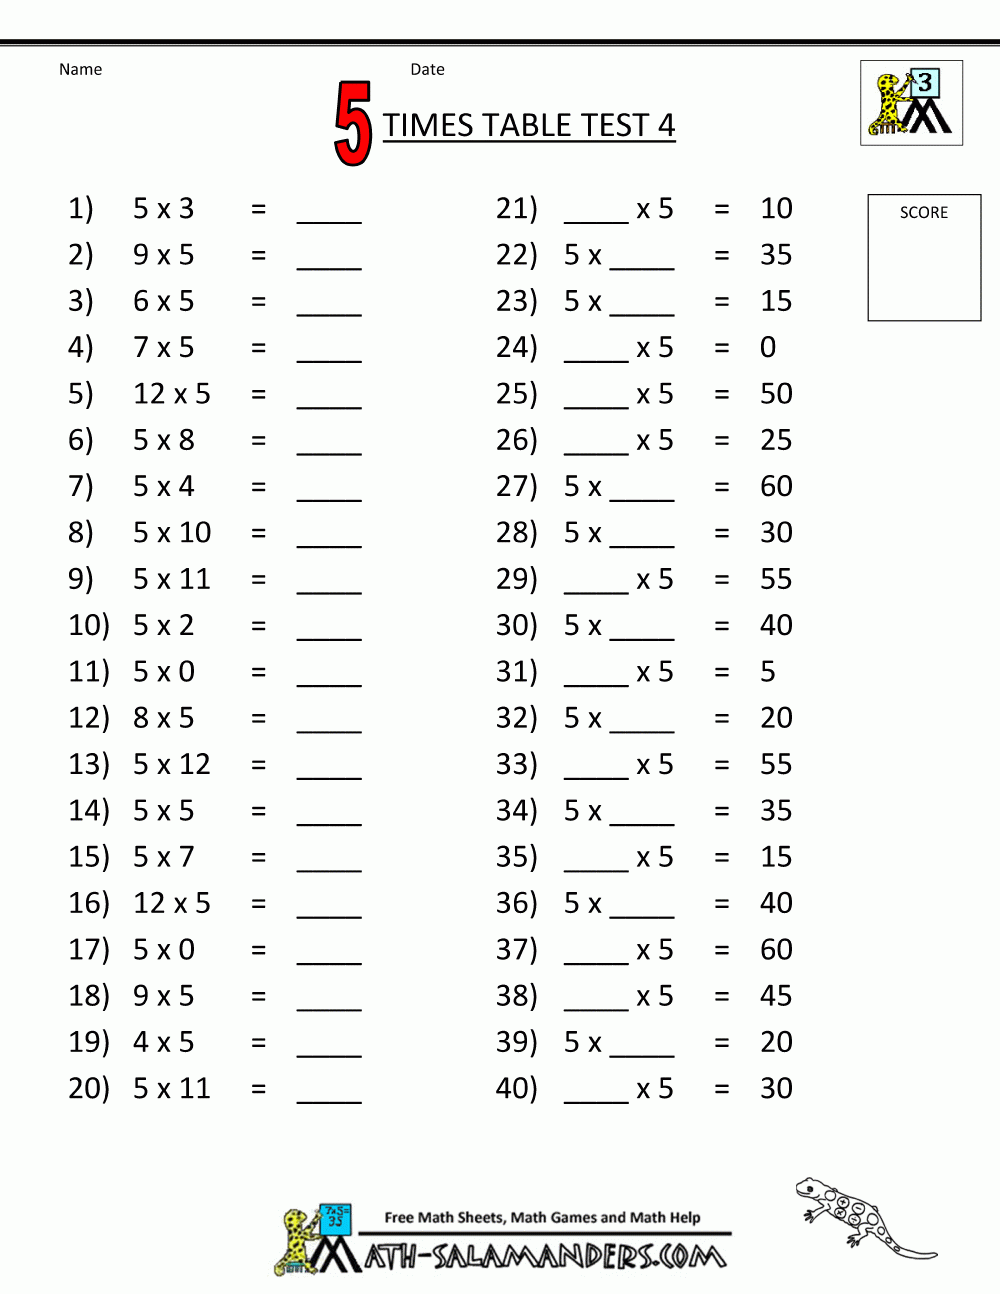 Times Table Tests - 2 3 4 5 10 Times Tables | Math Practice